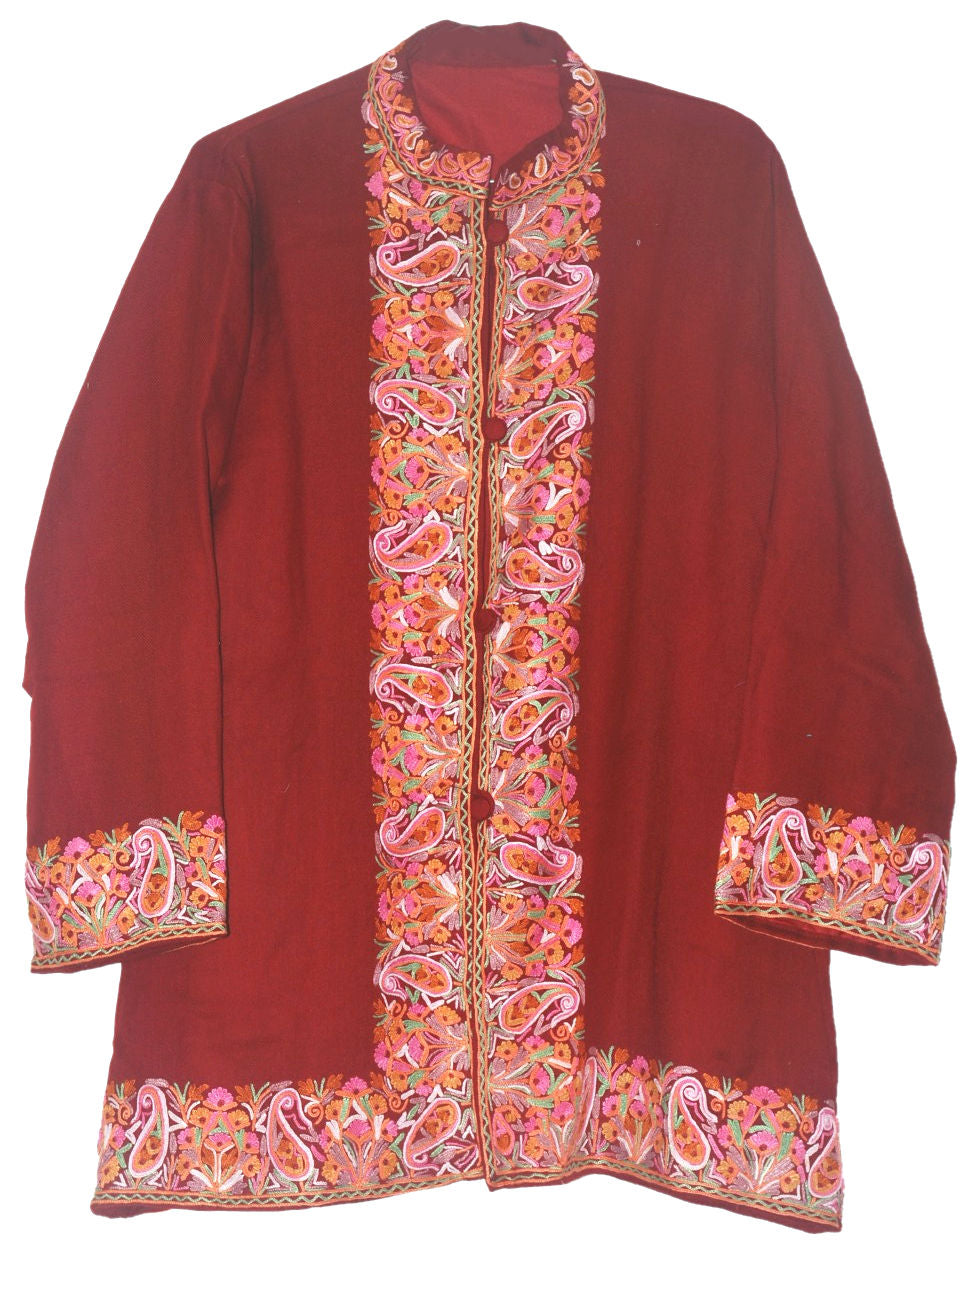 Embroidered Woolen Jacket Maroon, Multicolor Embroidery #BD-002